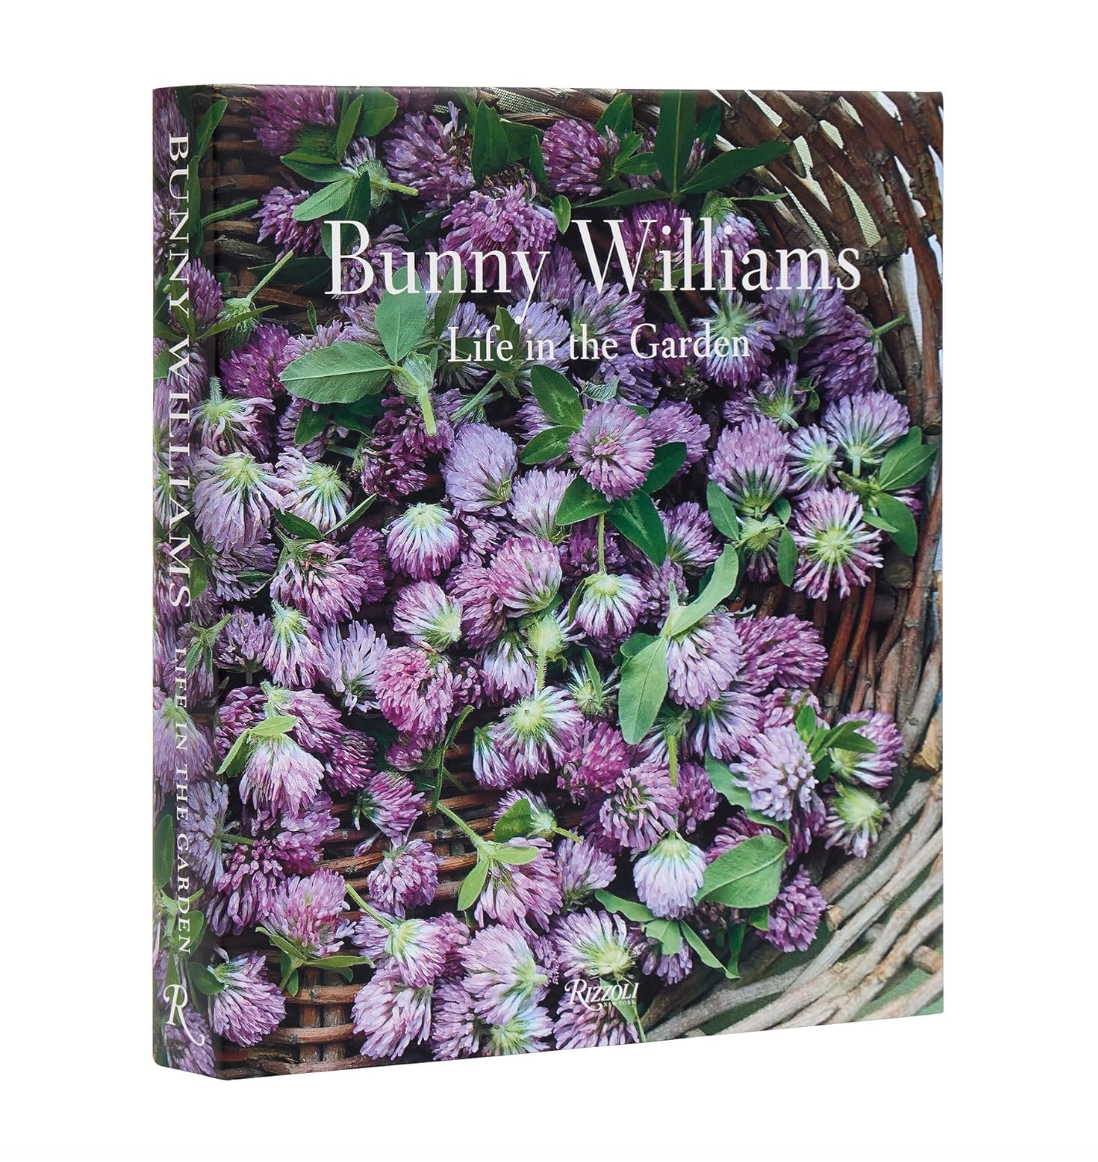 A book titled "Bunny Williams: Life in the Garden" by Random House with a cover photo showing a wicker basket filled with lush purple clover flowers and green leaves, photographed in Scottsdale, Arizona.